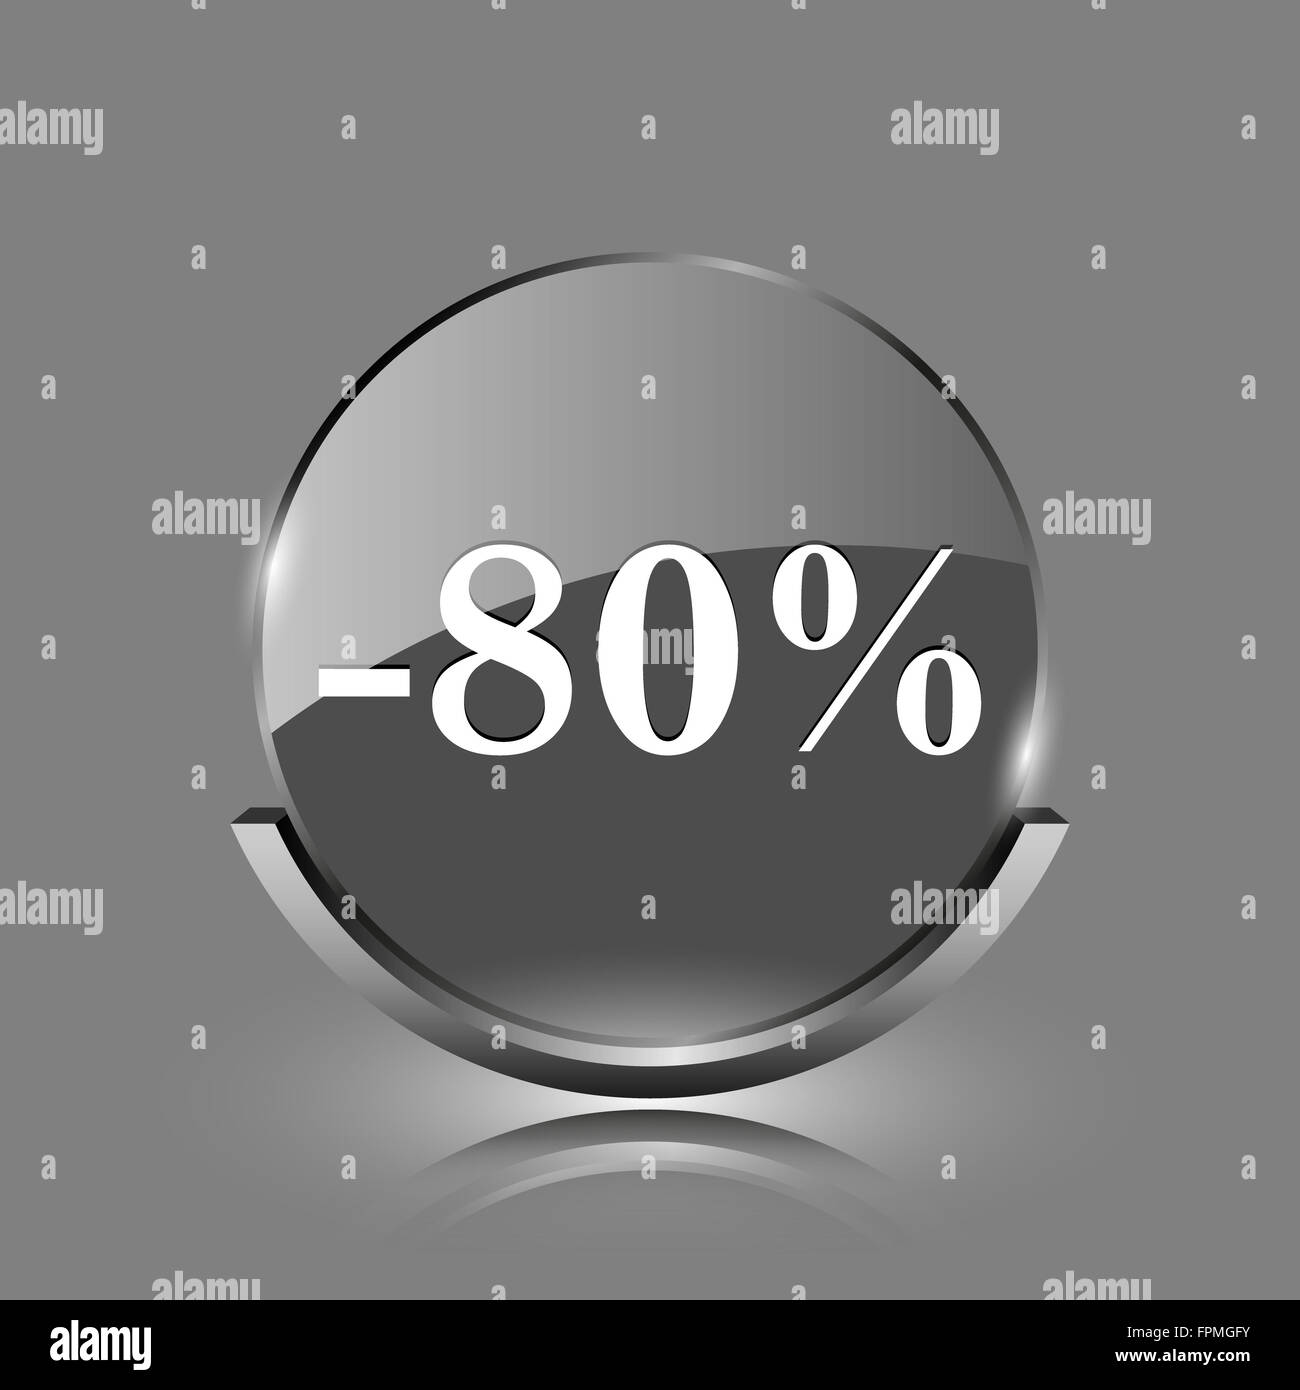 80 percent discount icon. Shiny glossy internet button on grey background. Stock Photo